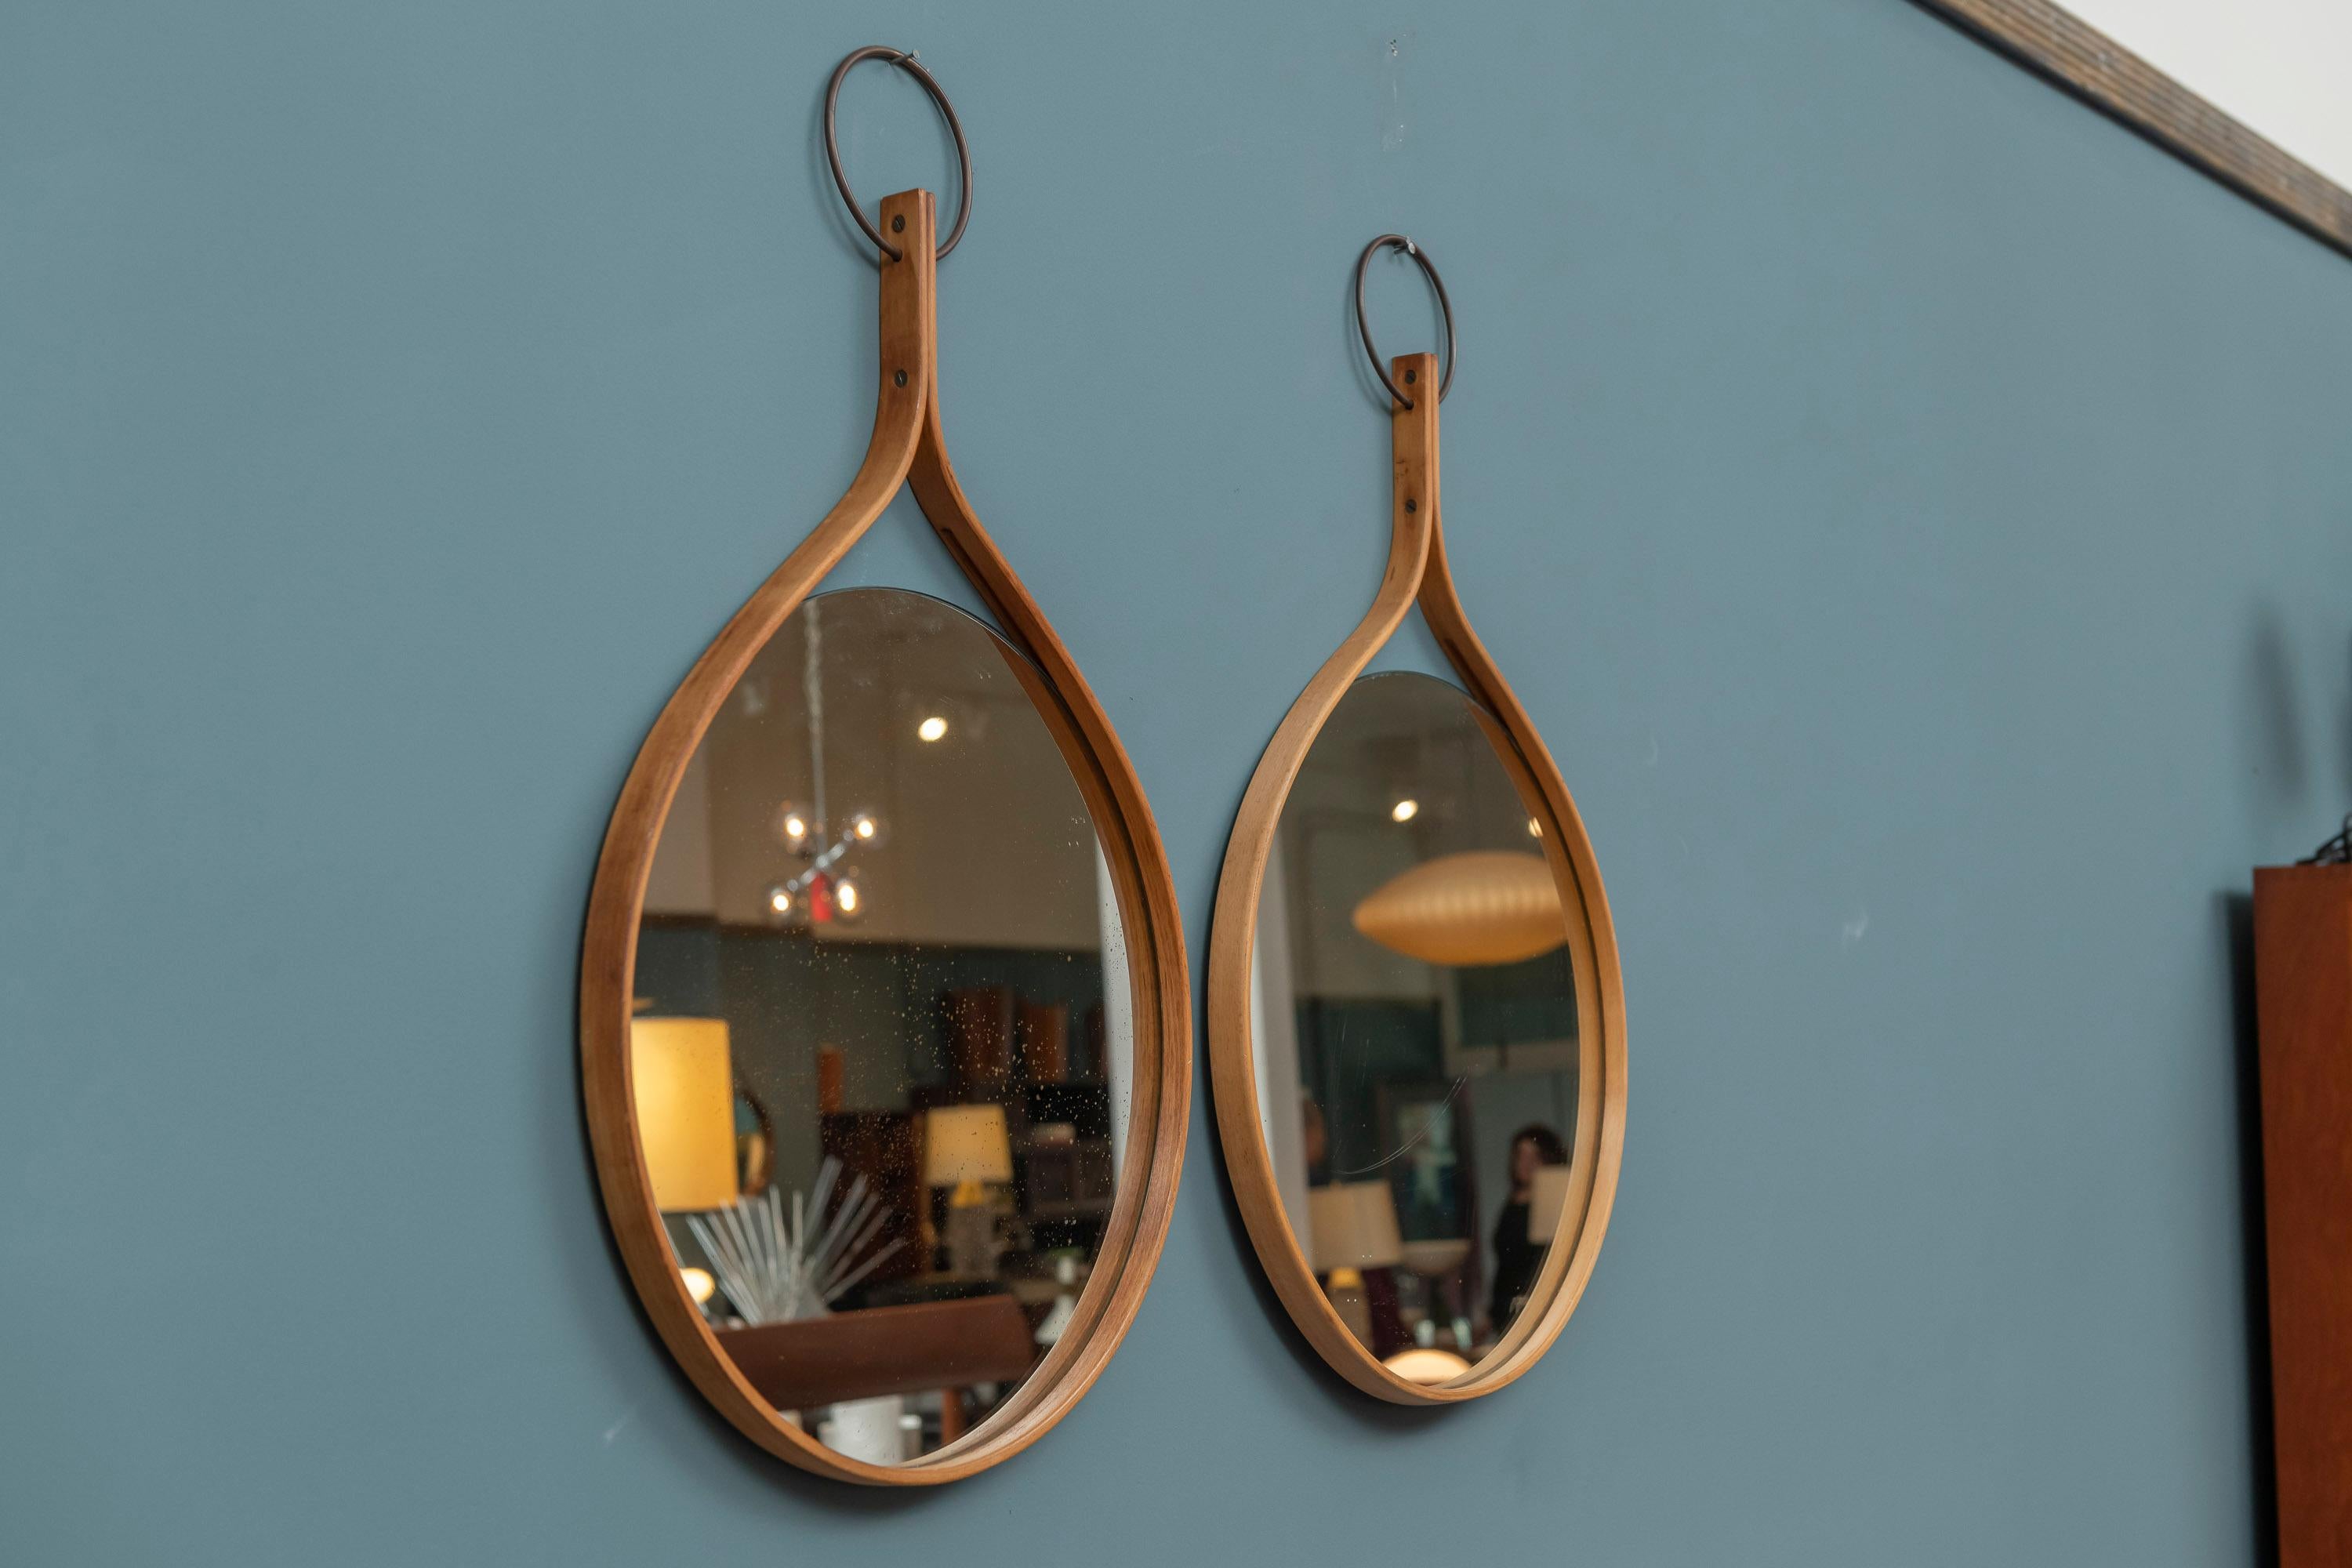 Pair of Hans-Agne Jakobsson wall mirrors, circa 1955. A beautiful bentwood design in good original condition.
  